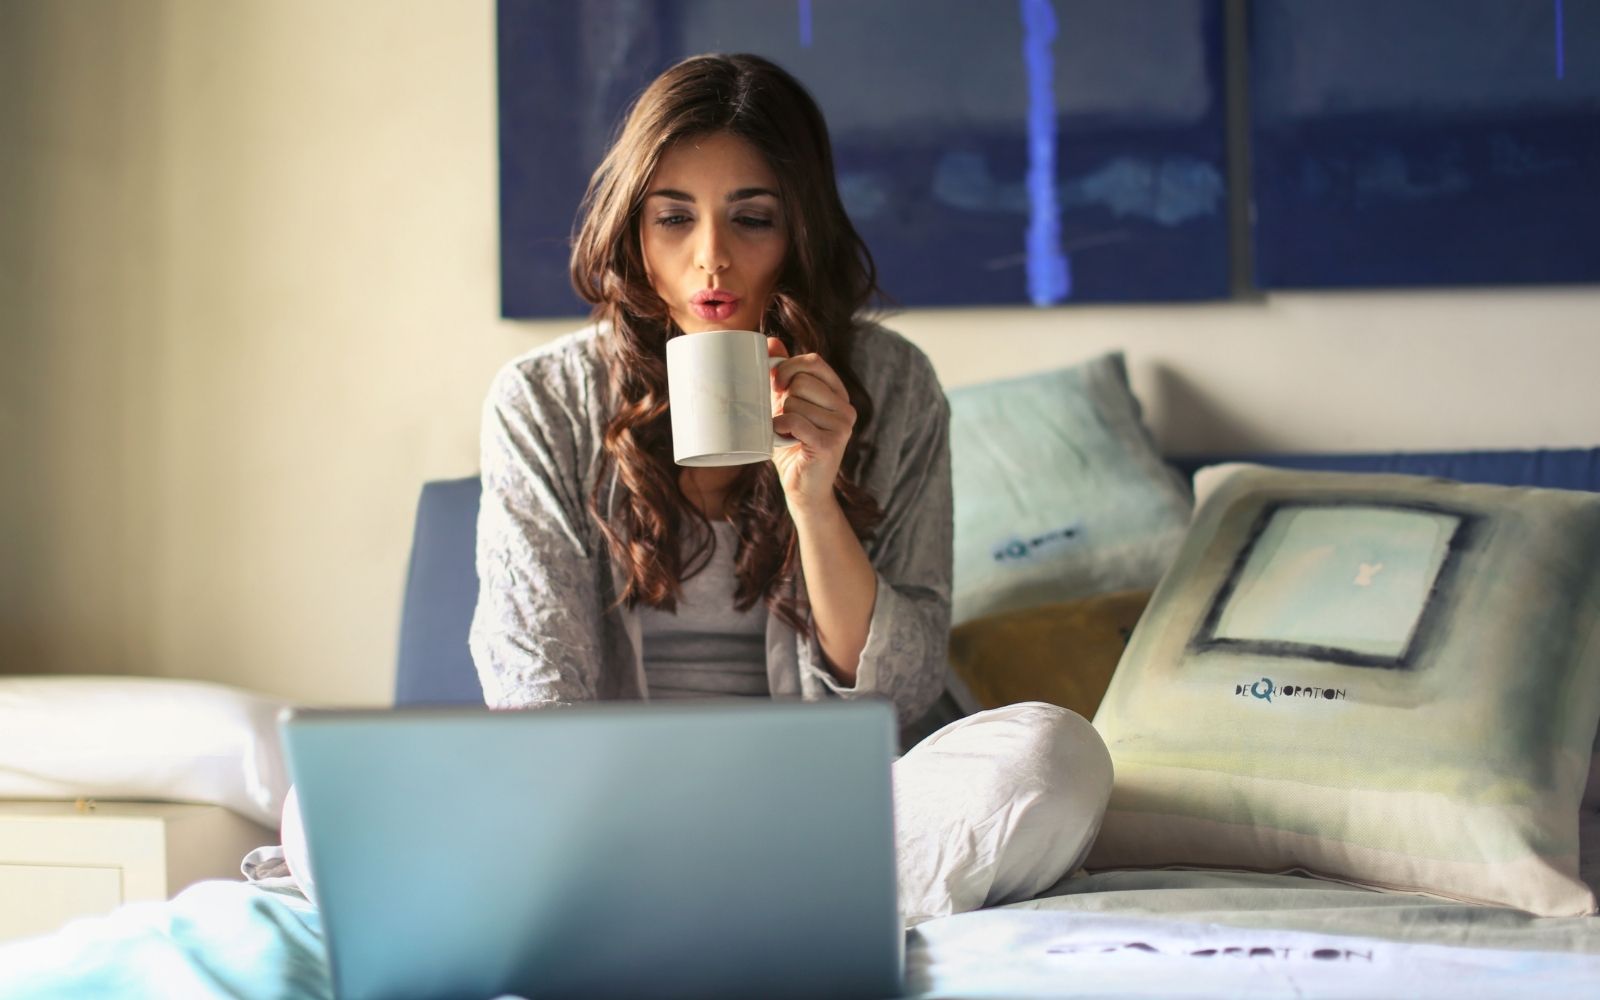 How To Stay Healthy While Working From Home